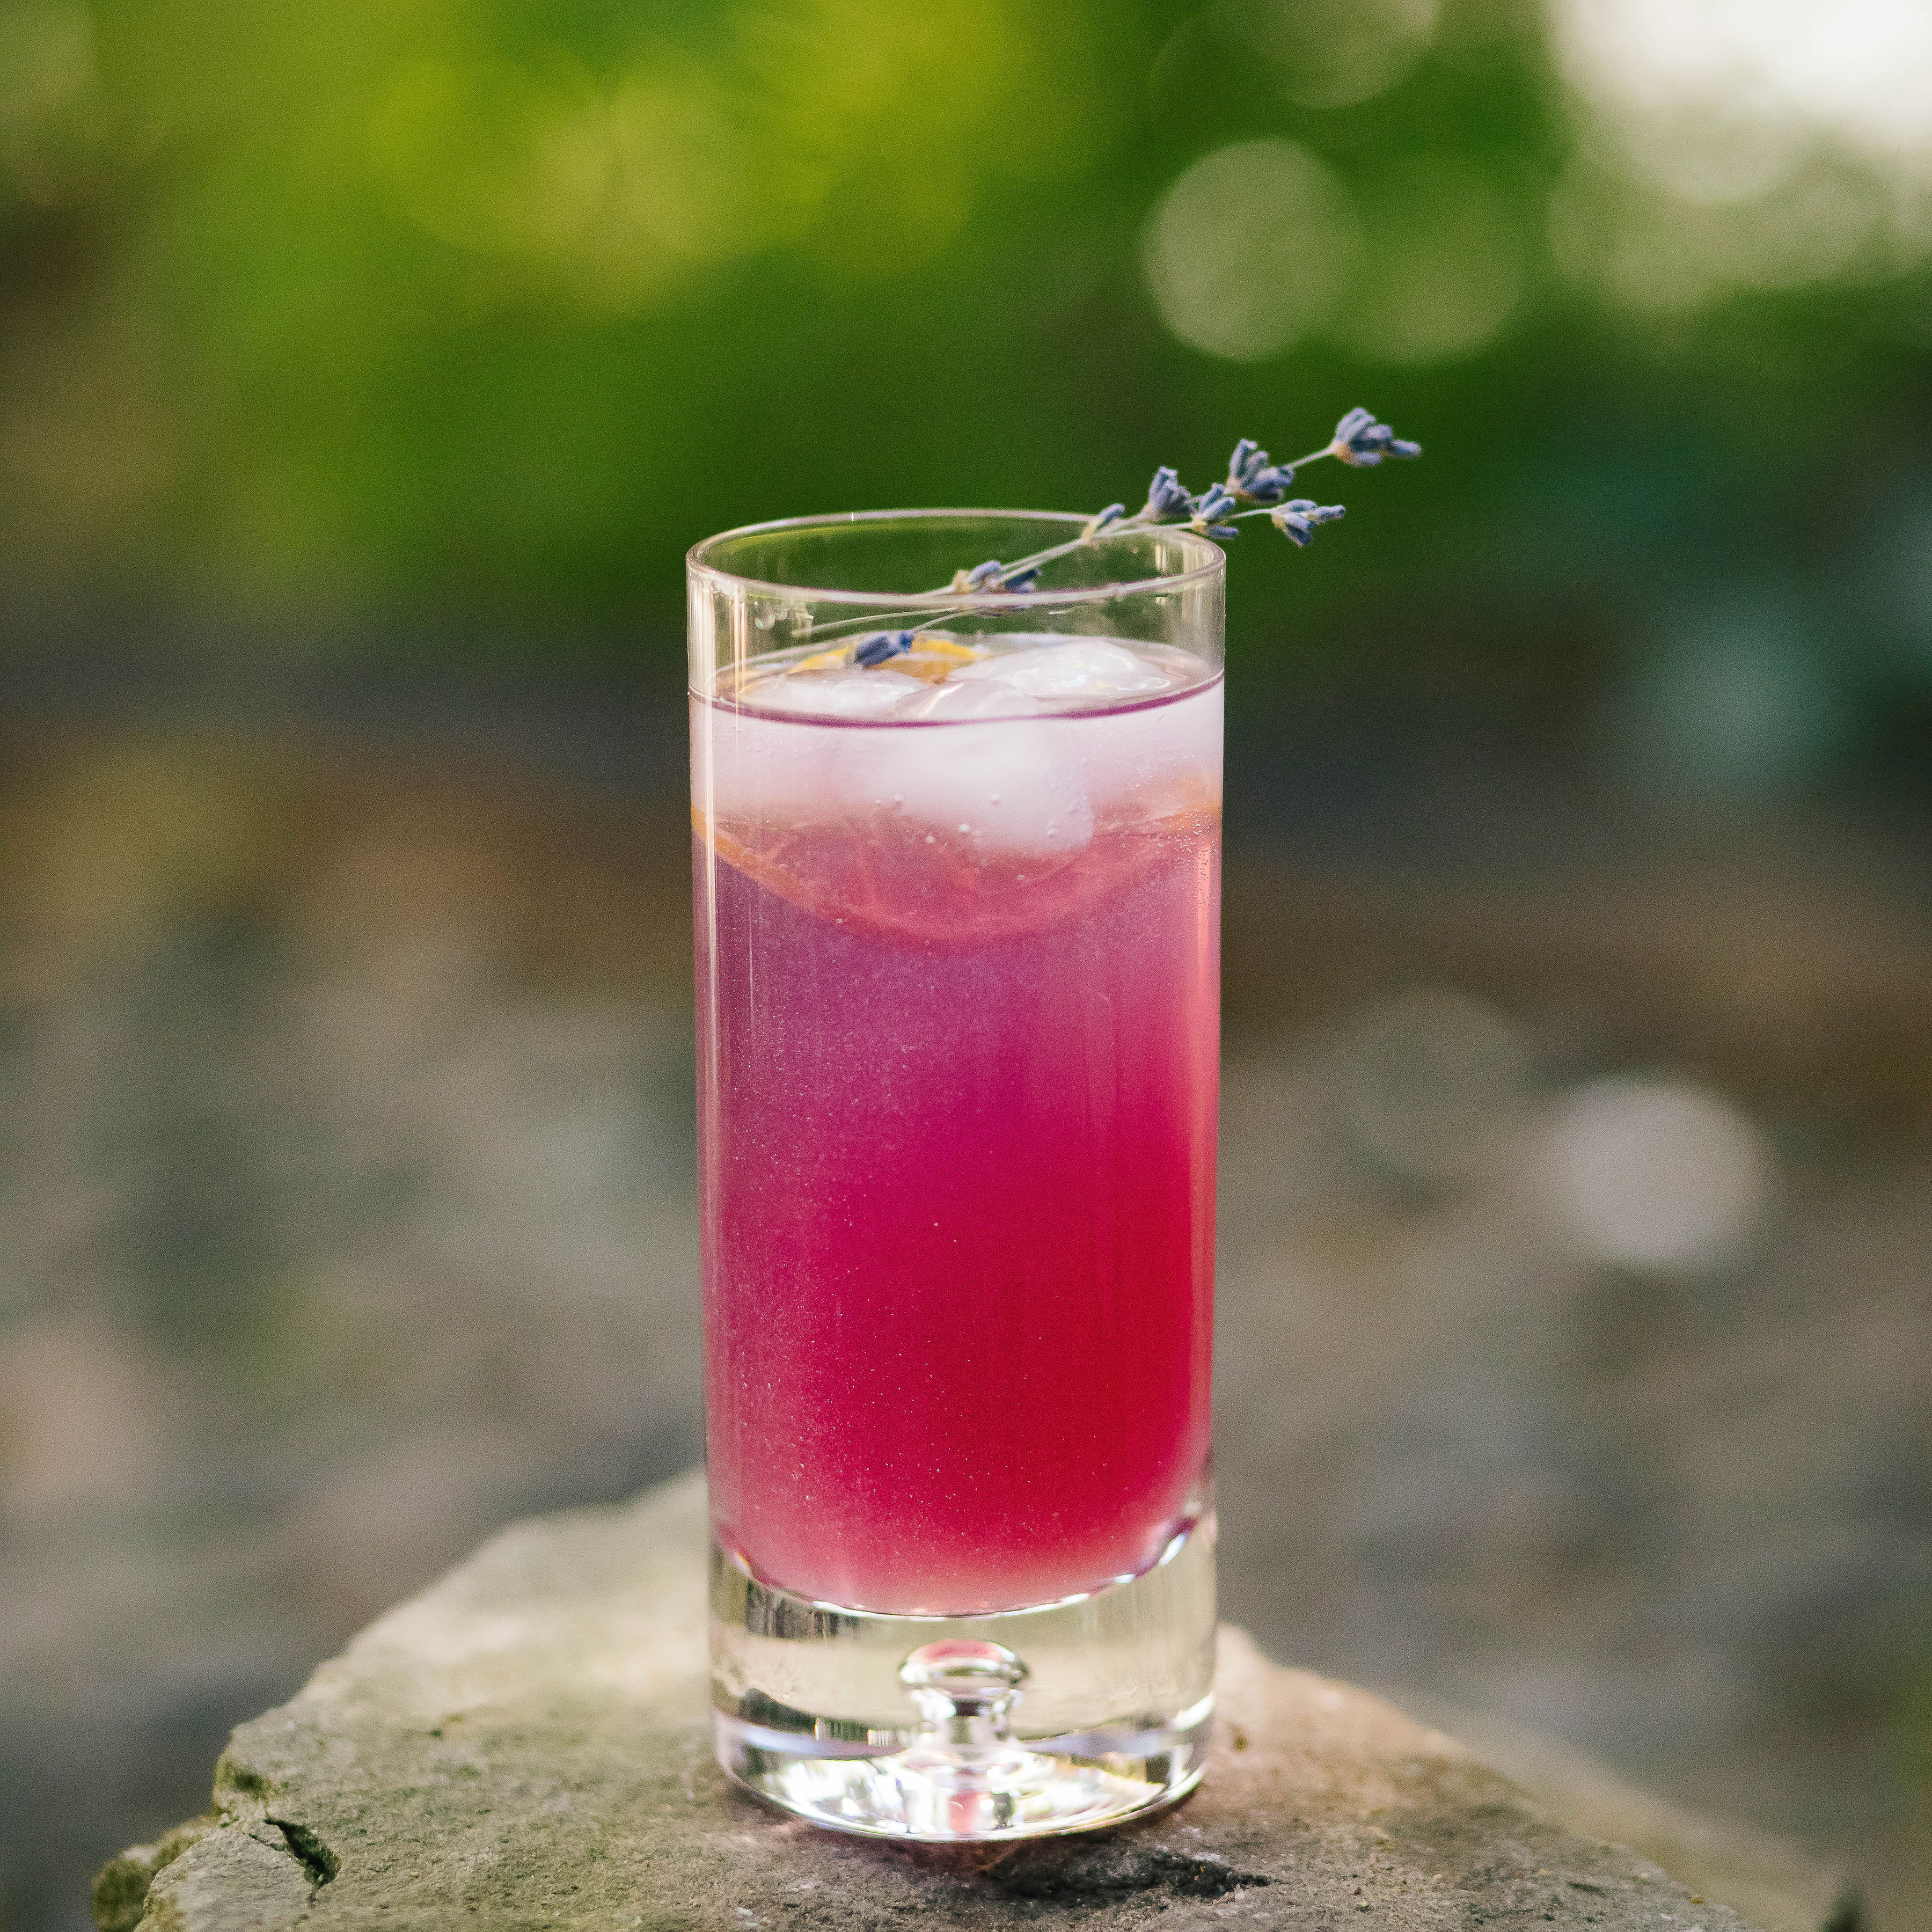 A photograph of a beautiful purple drink garnished with a sprig of lavender